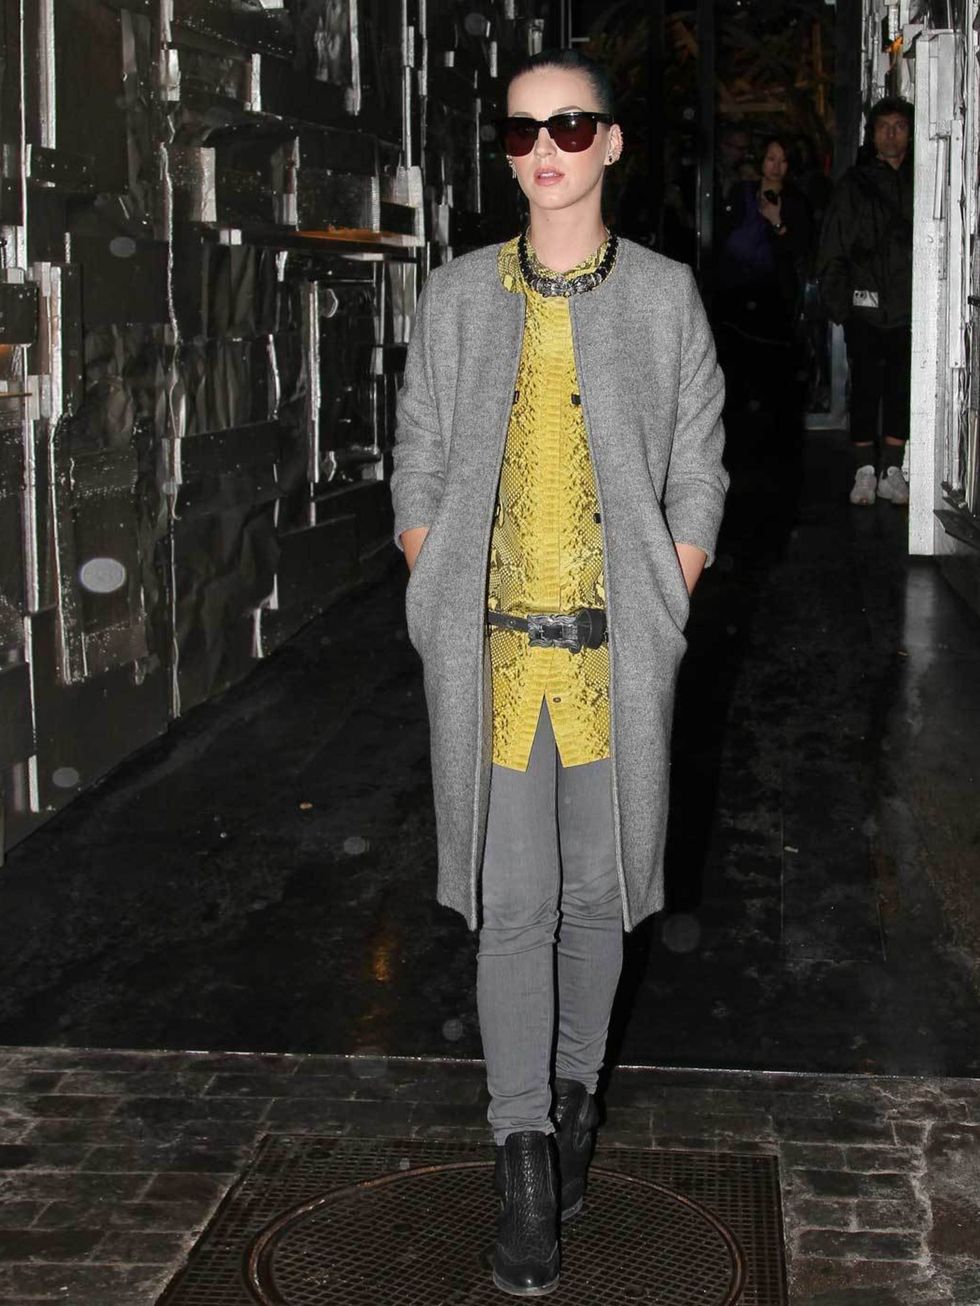 <p><a href="http://www.elleuk.com/star-style/celebrity-style-files/katy-perry">Katy Perry</a> adding a splash of yellow to her look with a snakeskin cardigan while out shopping in Paris, March 2012</p>